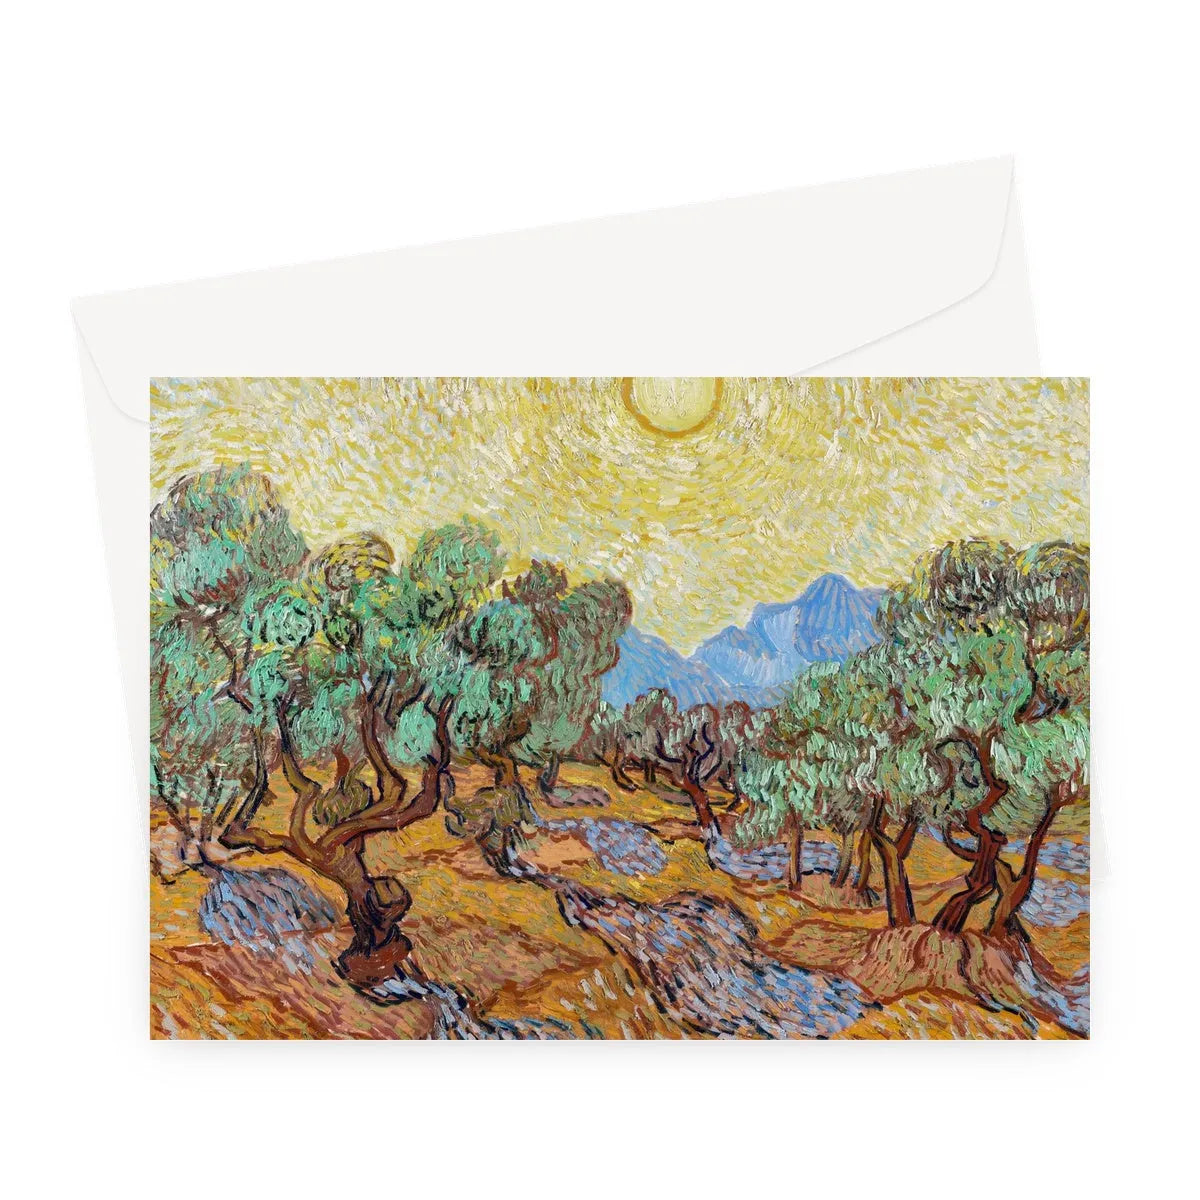 Olive Trees Too By Vincent Van Gogh Greeting Card - A5 Landscape / 1 Card - Notebooks & Notepads - Aesthetic Art